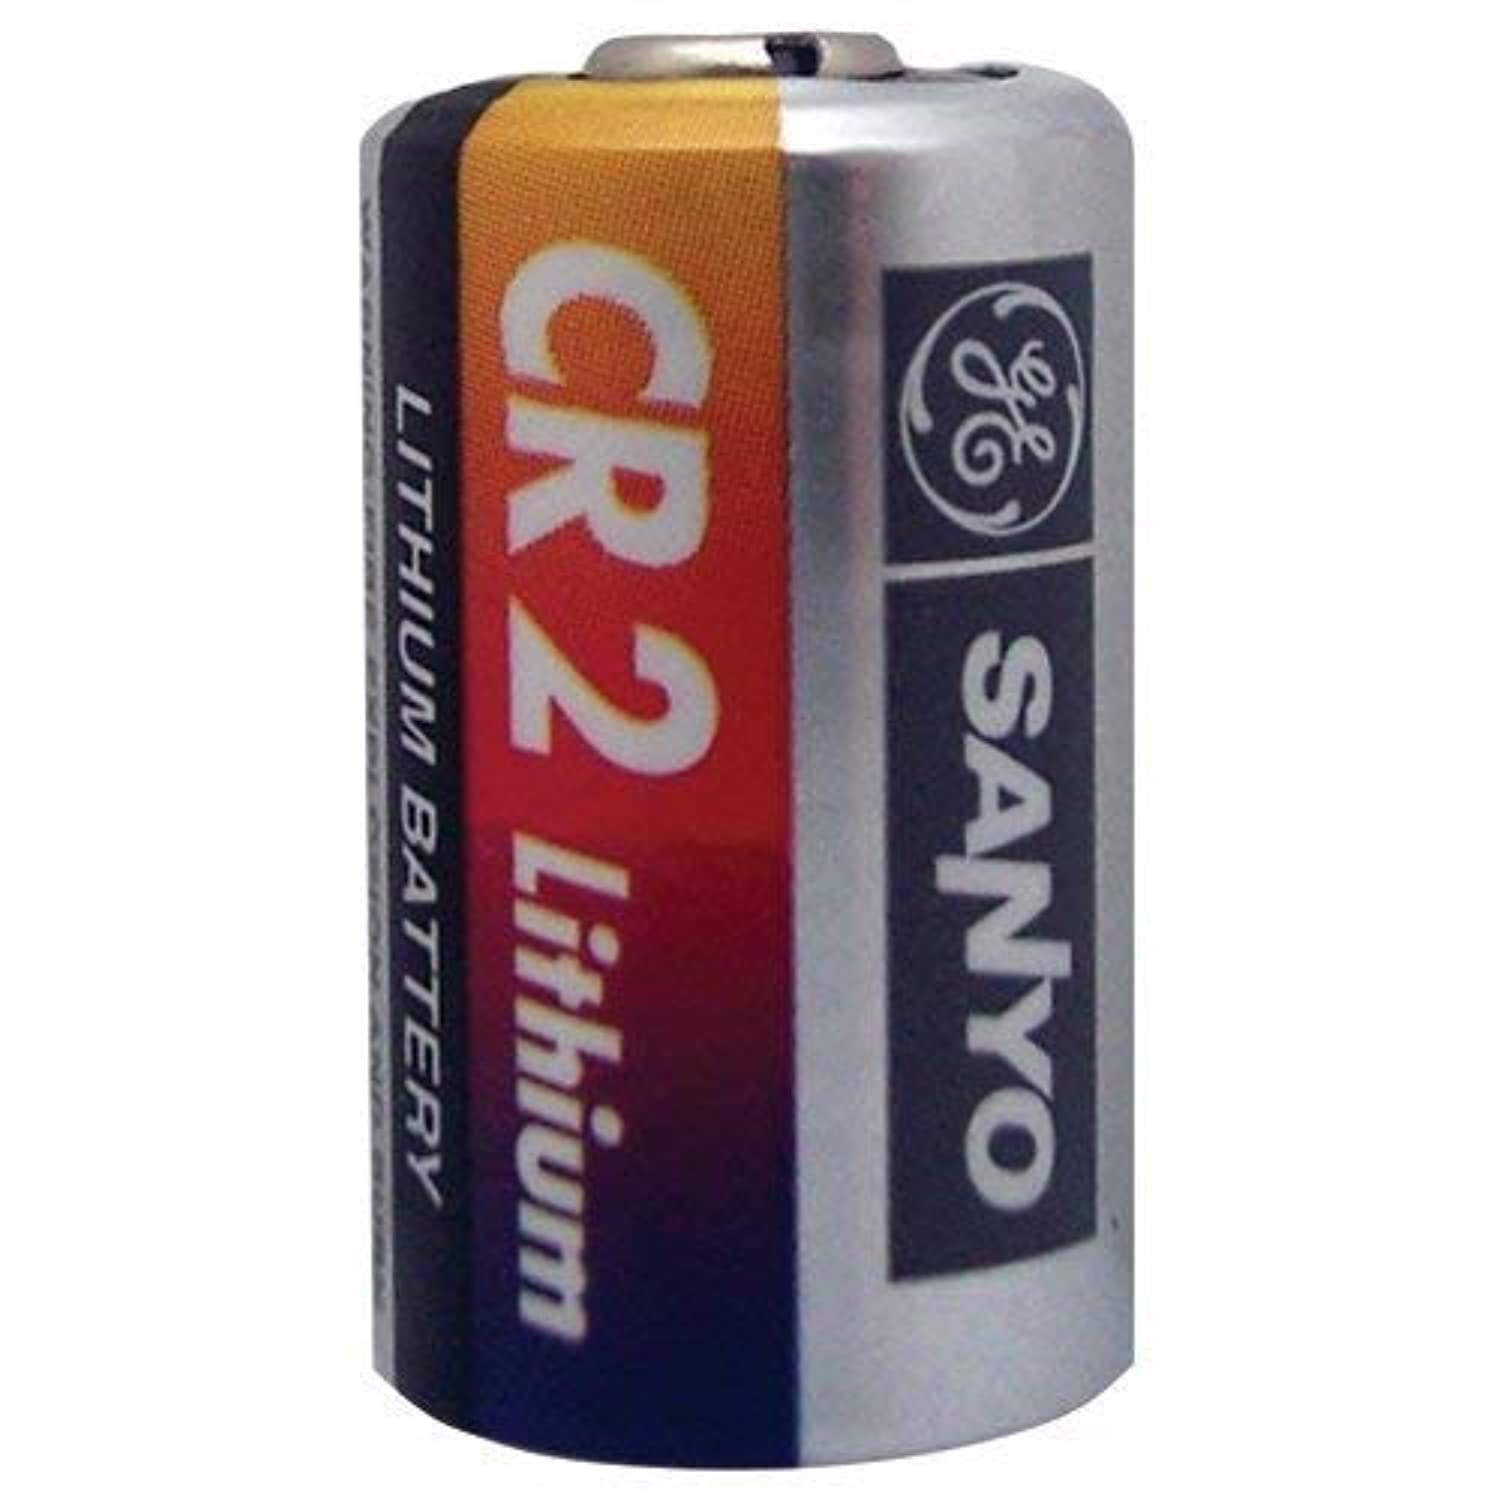 sanyo-cr2-sanyo-cr2-photo-lithium-battery-discontinued-by-manufacturer